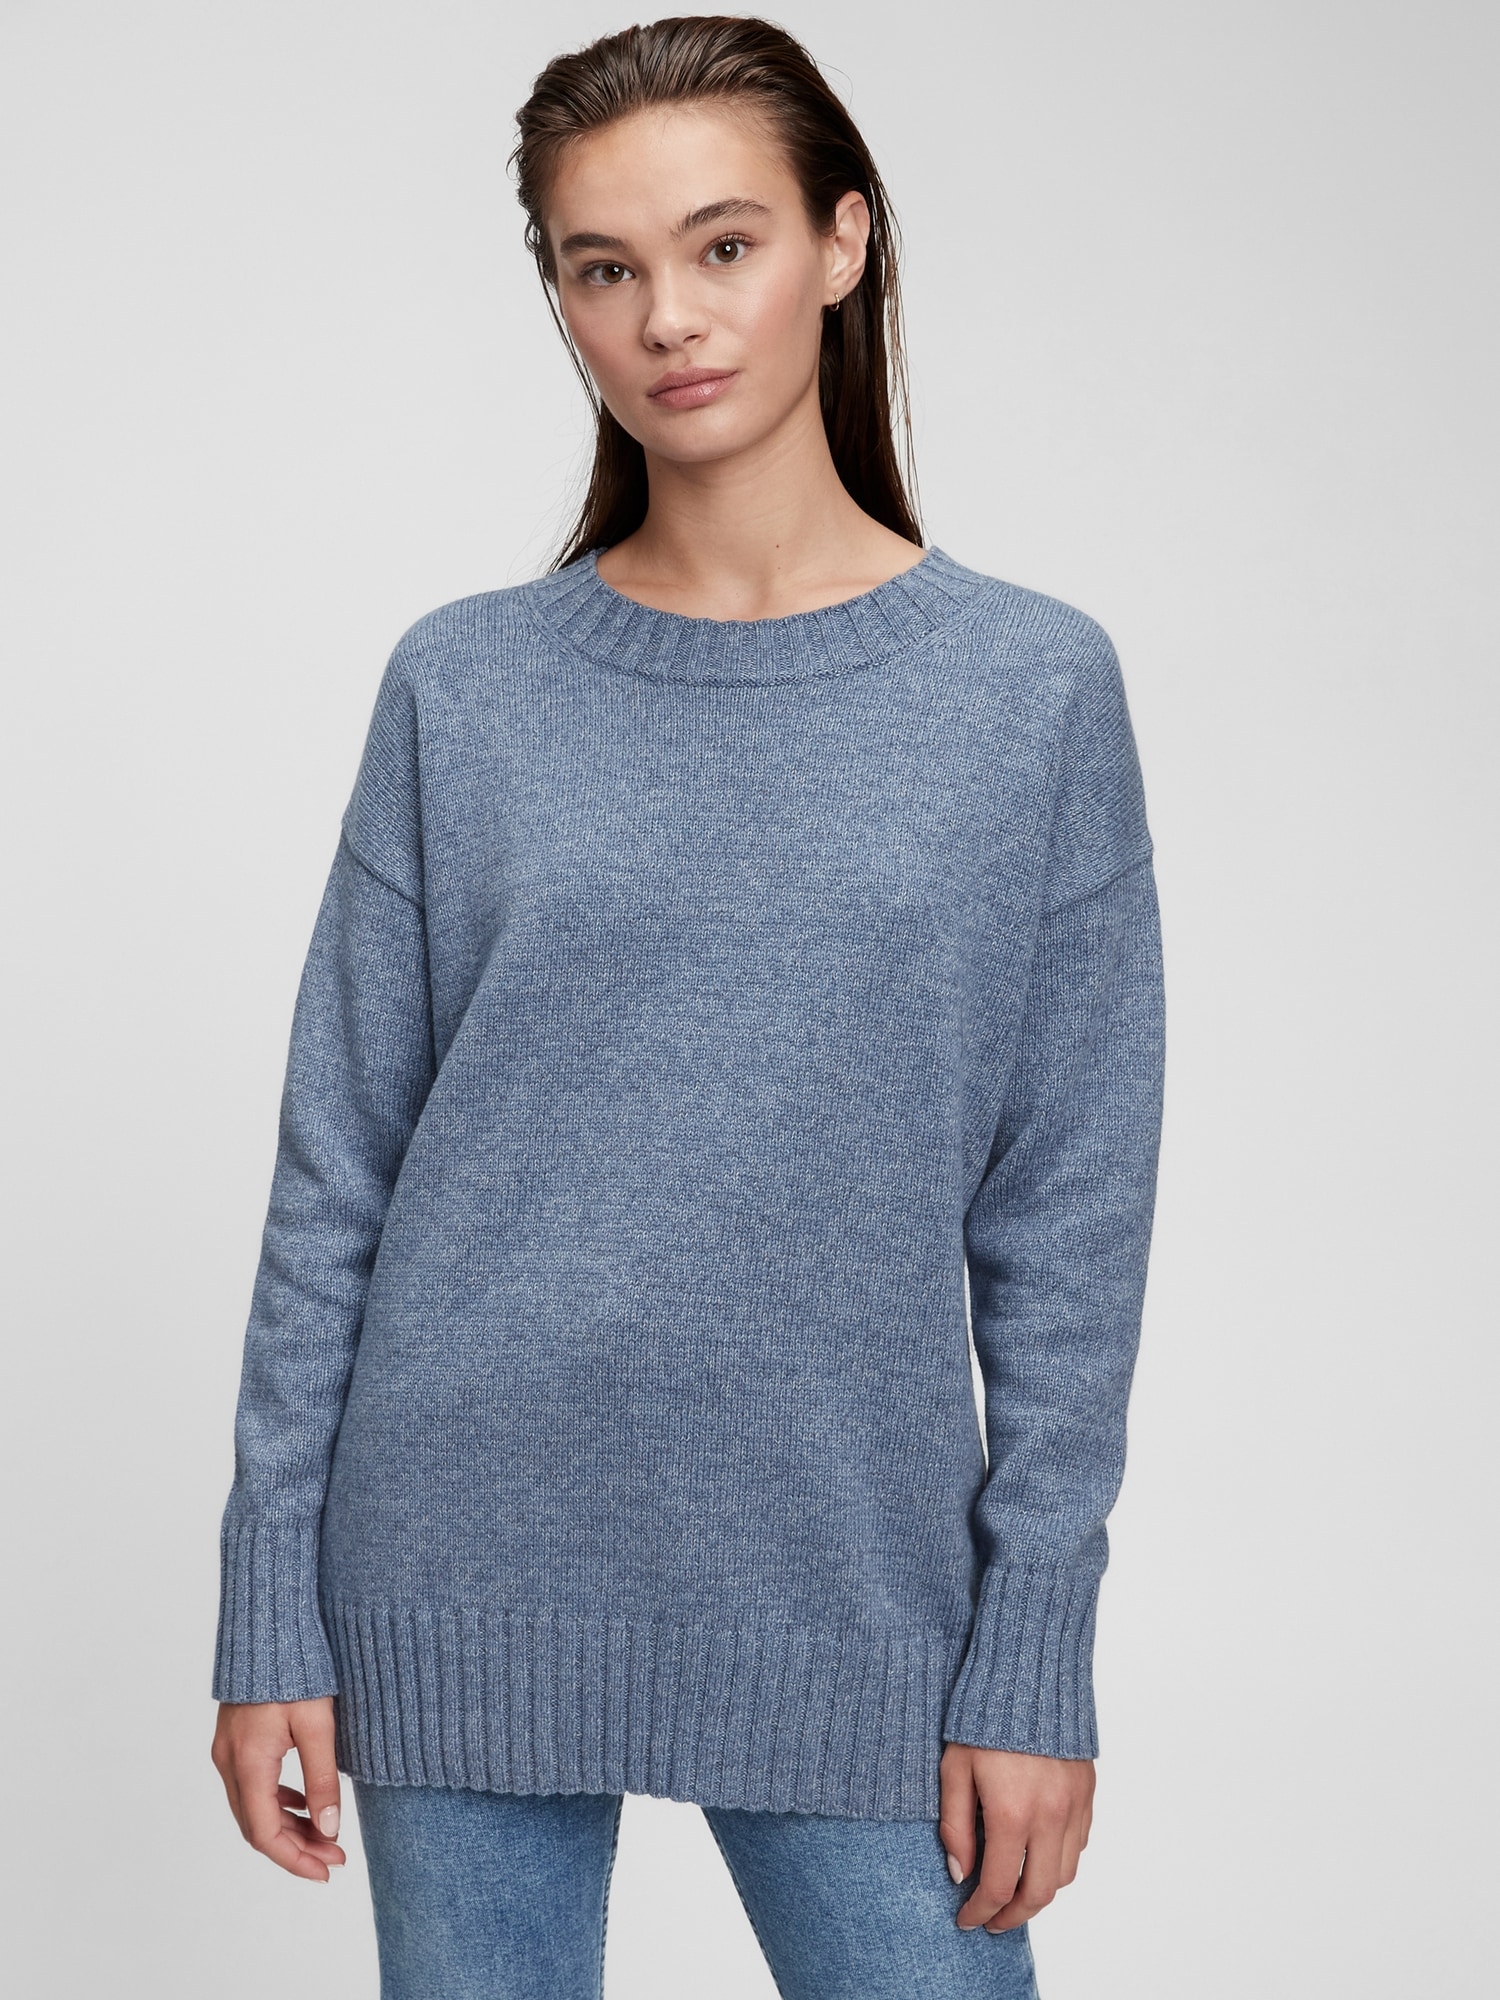 Relaxed Cotton Tunic Sweater | Gap